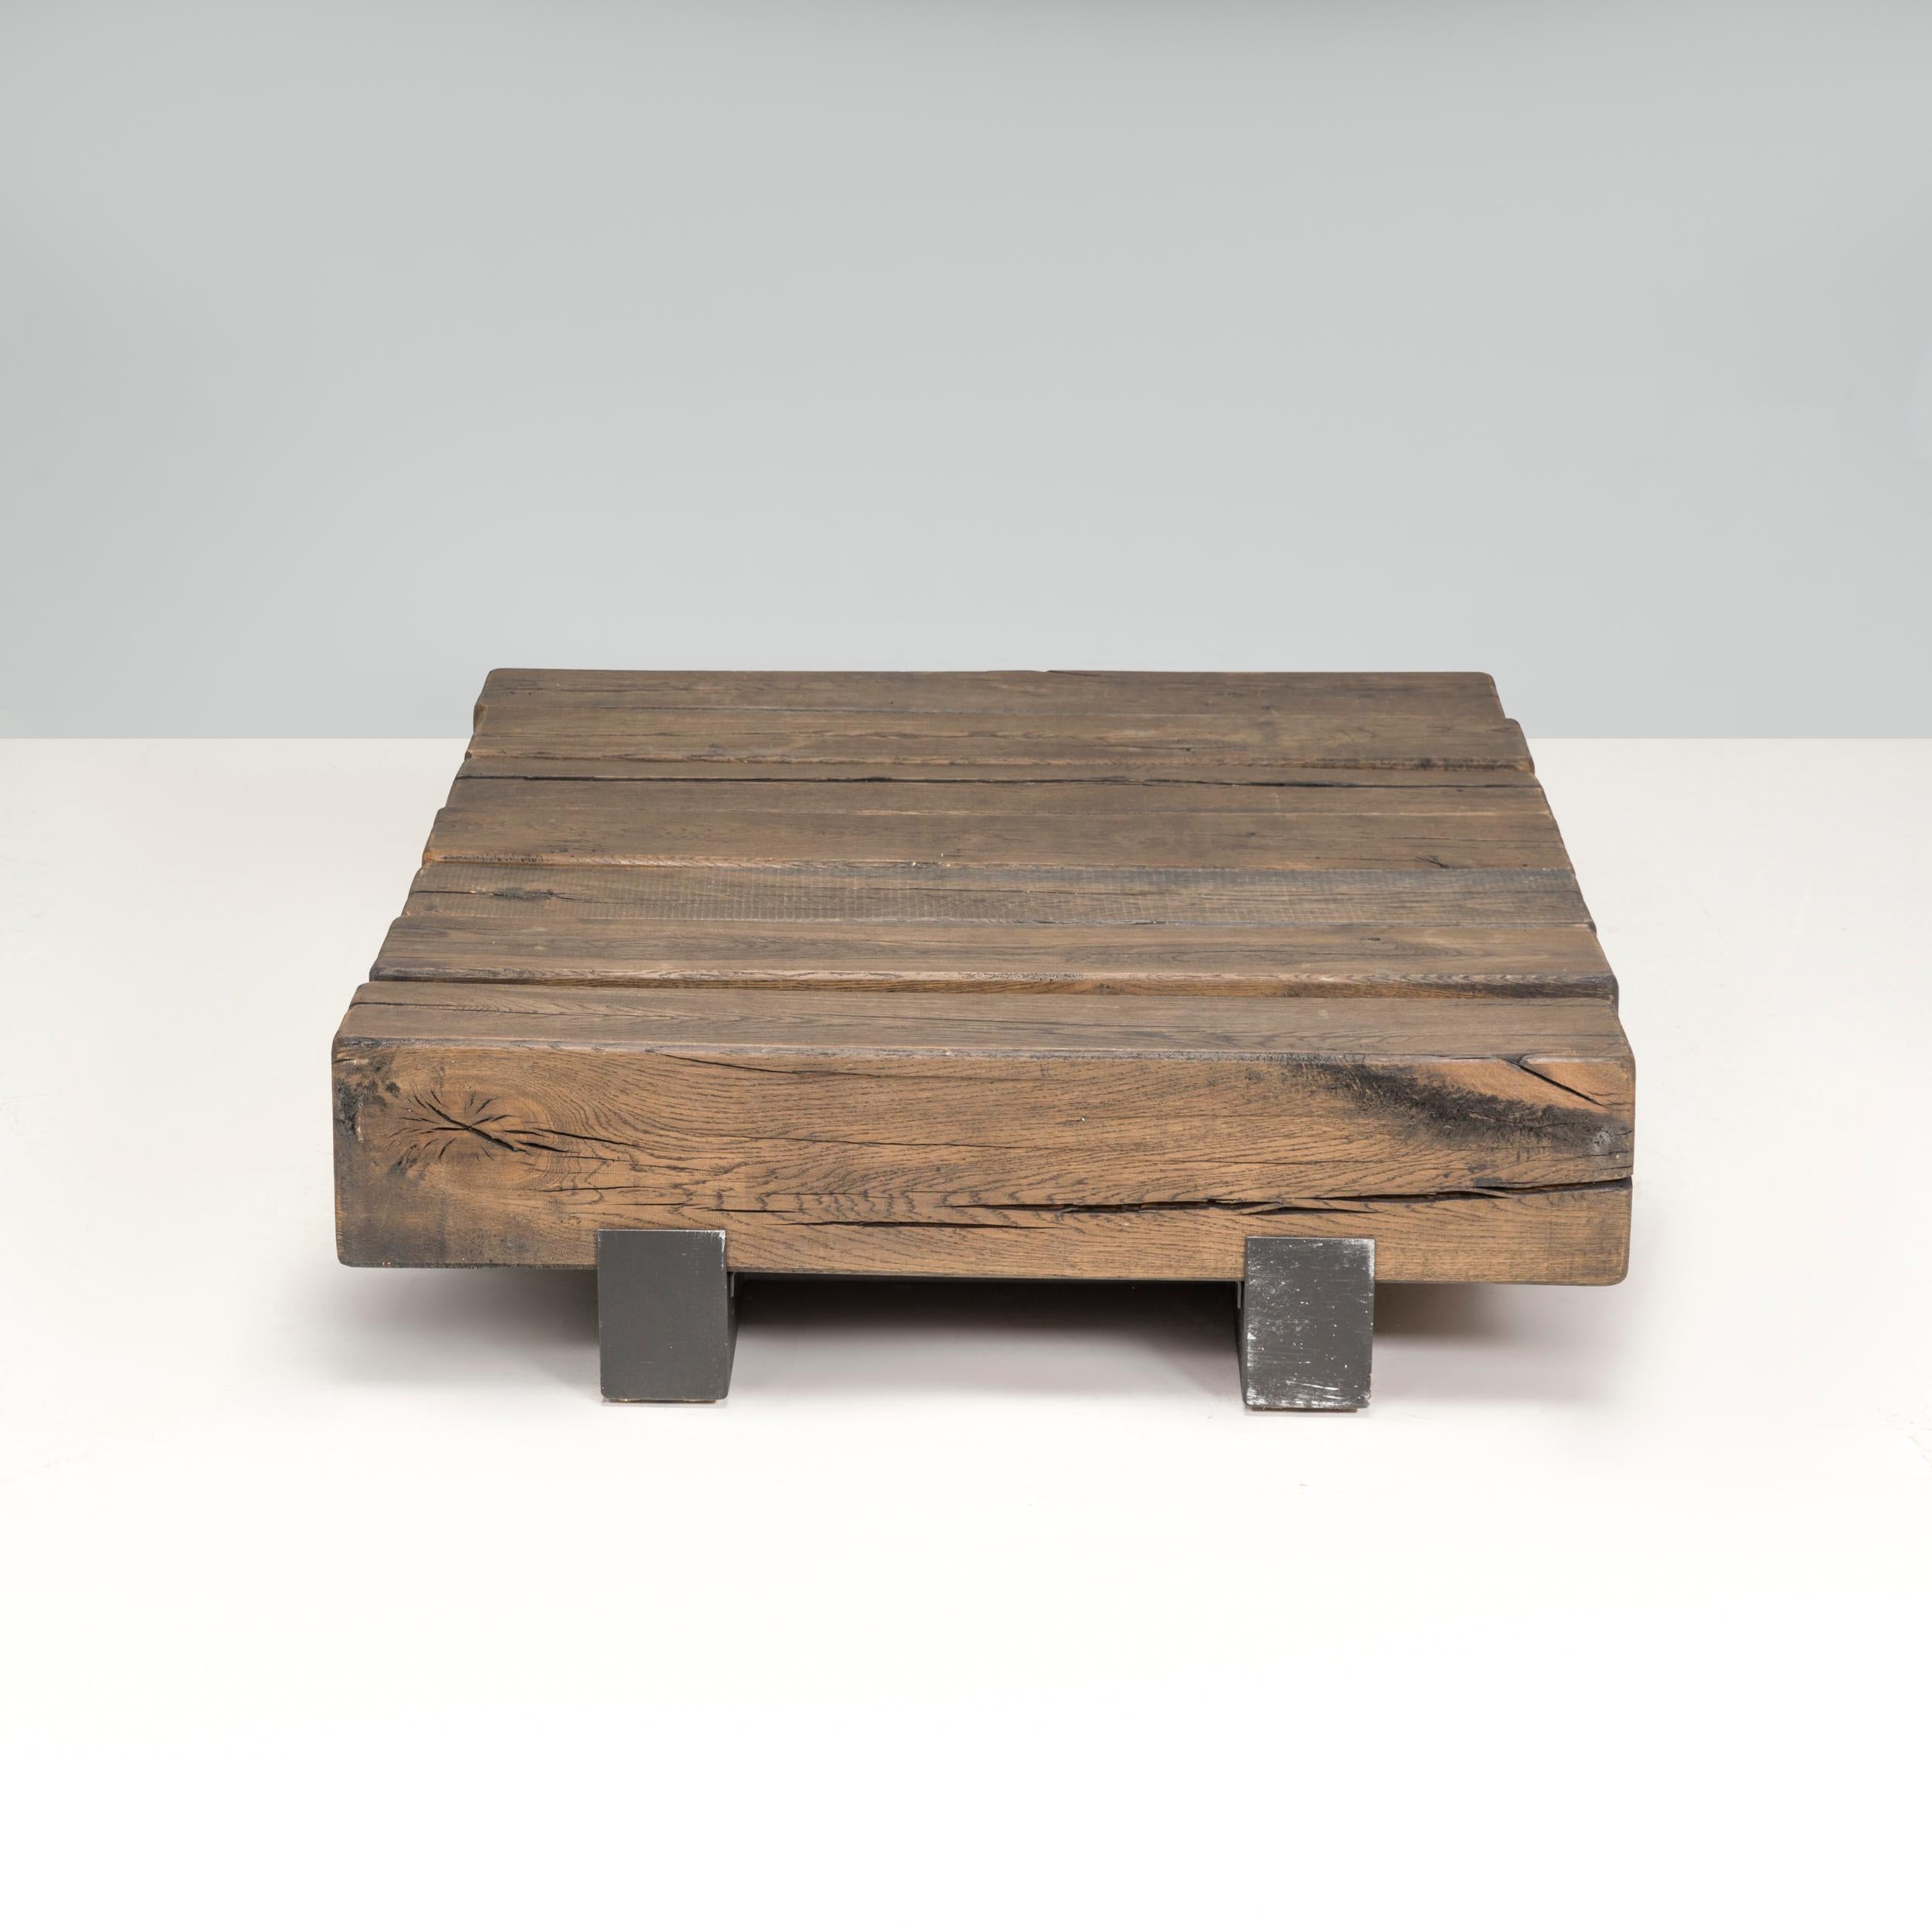 Designed by Marlieke van Rossum this rectangular Beam Coffee table is a wonderful industrial example of the Dutch design house. The natural character of the wood is allowed to show through, so not all knots and cracks will be filled.

A low